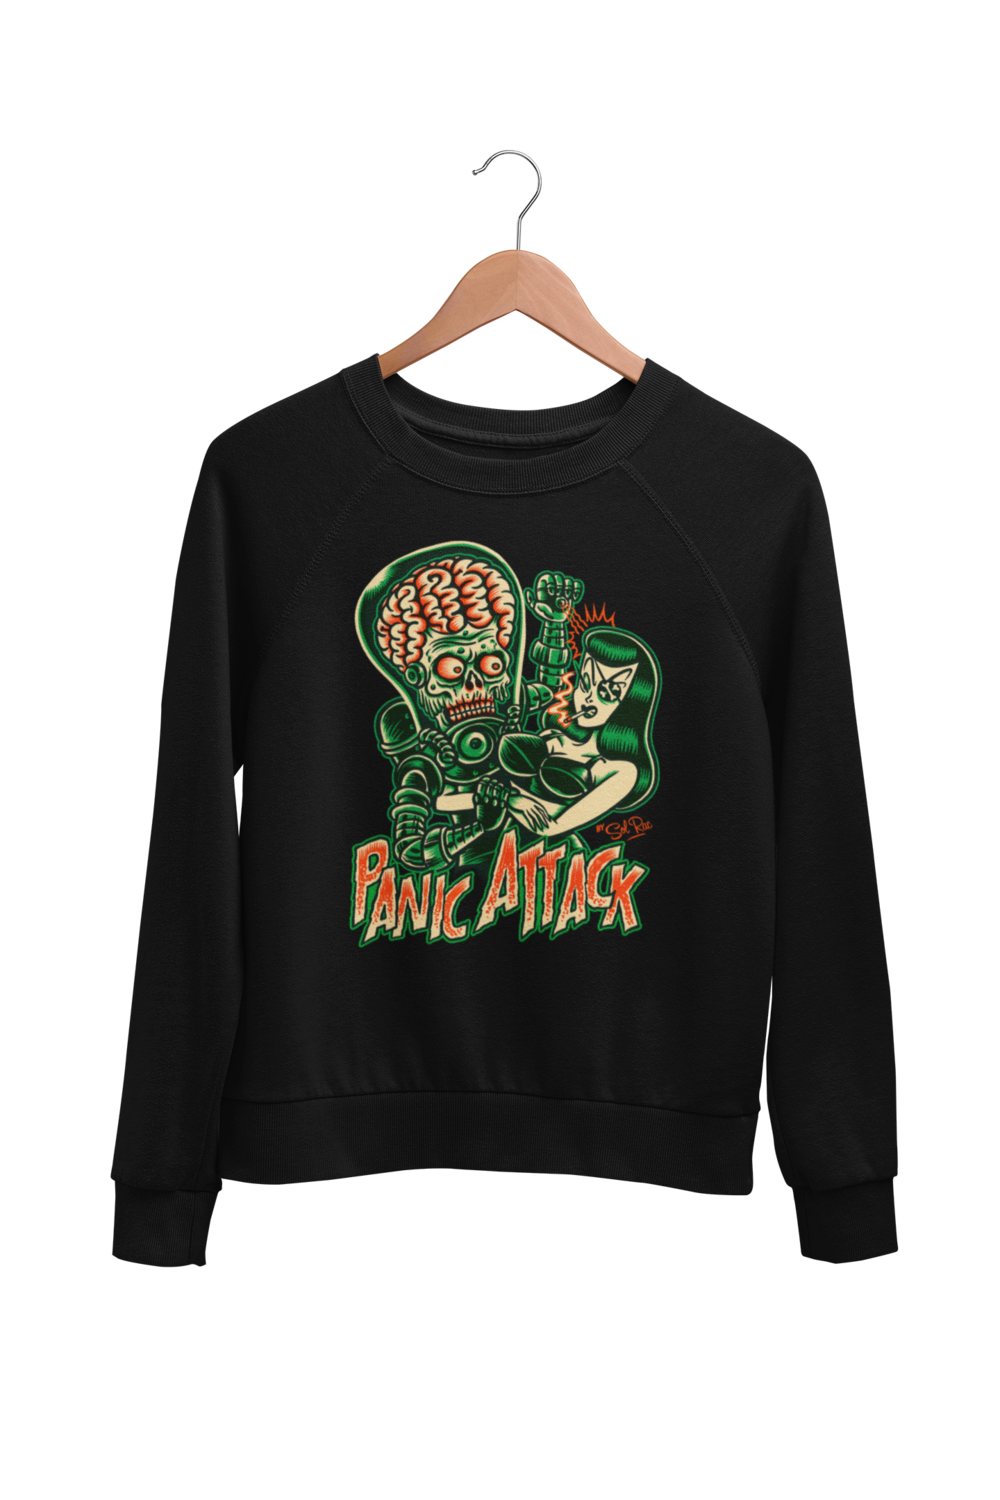 PANIC ATTACK ! SWEATSHIRT UNISEX by BY SOL RAC